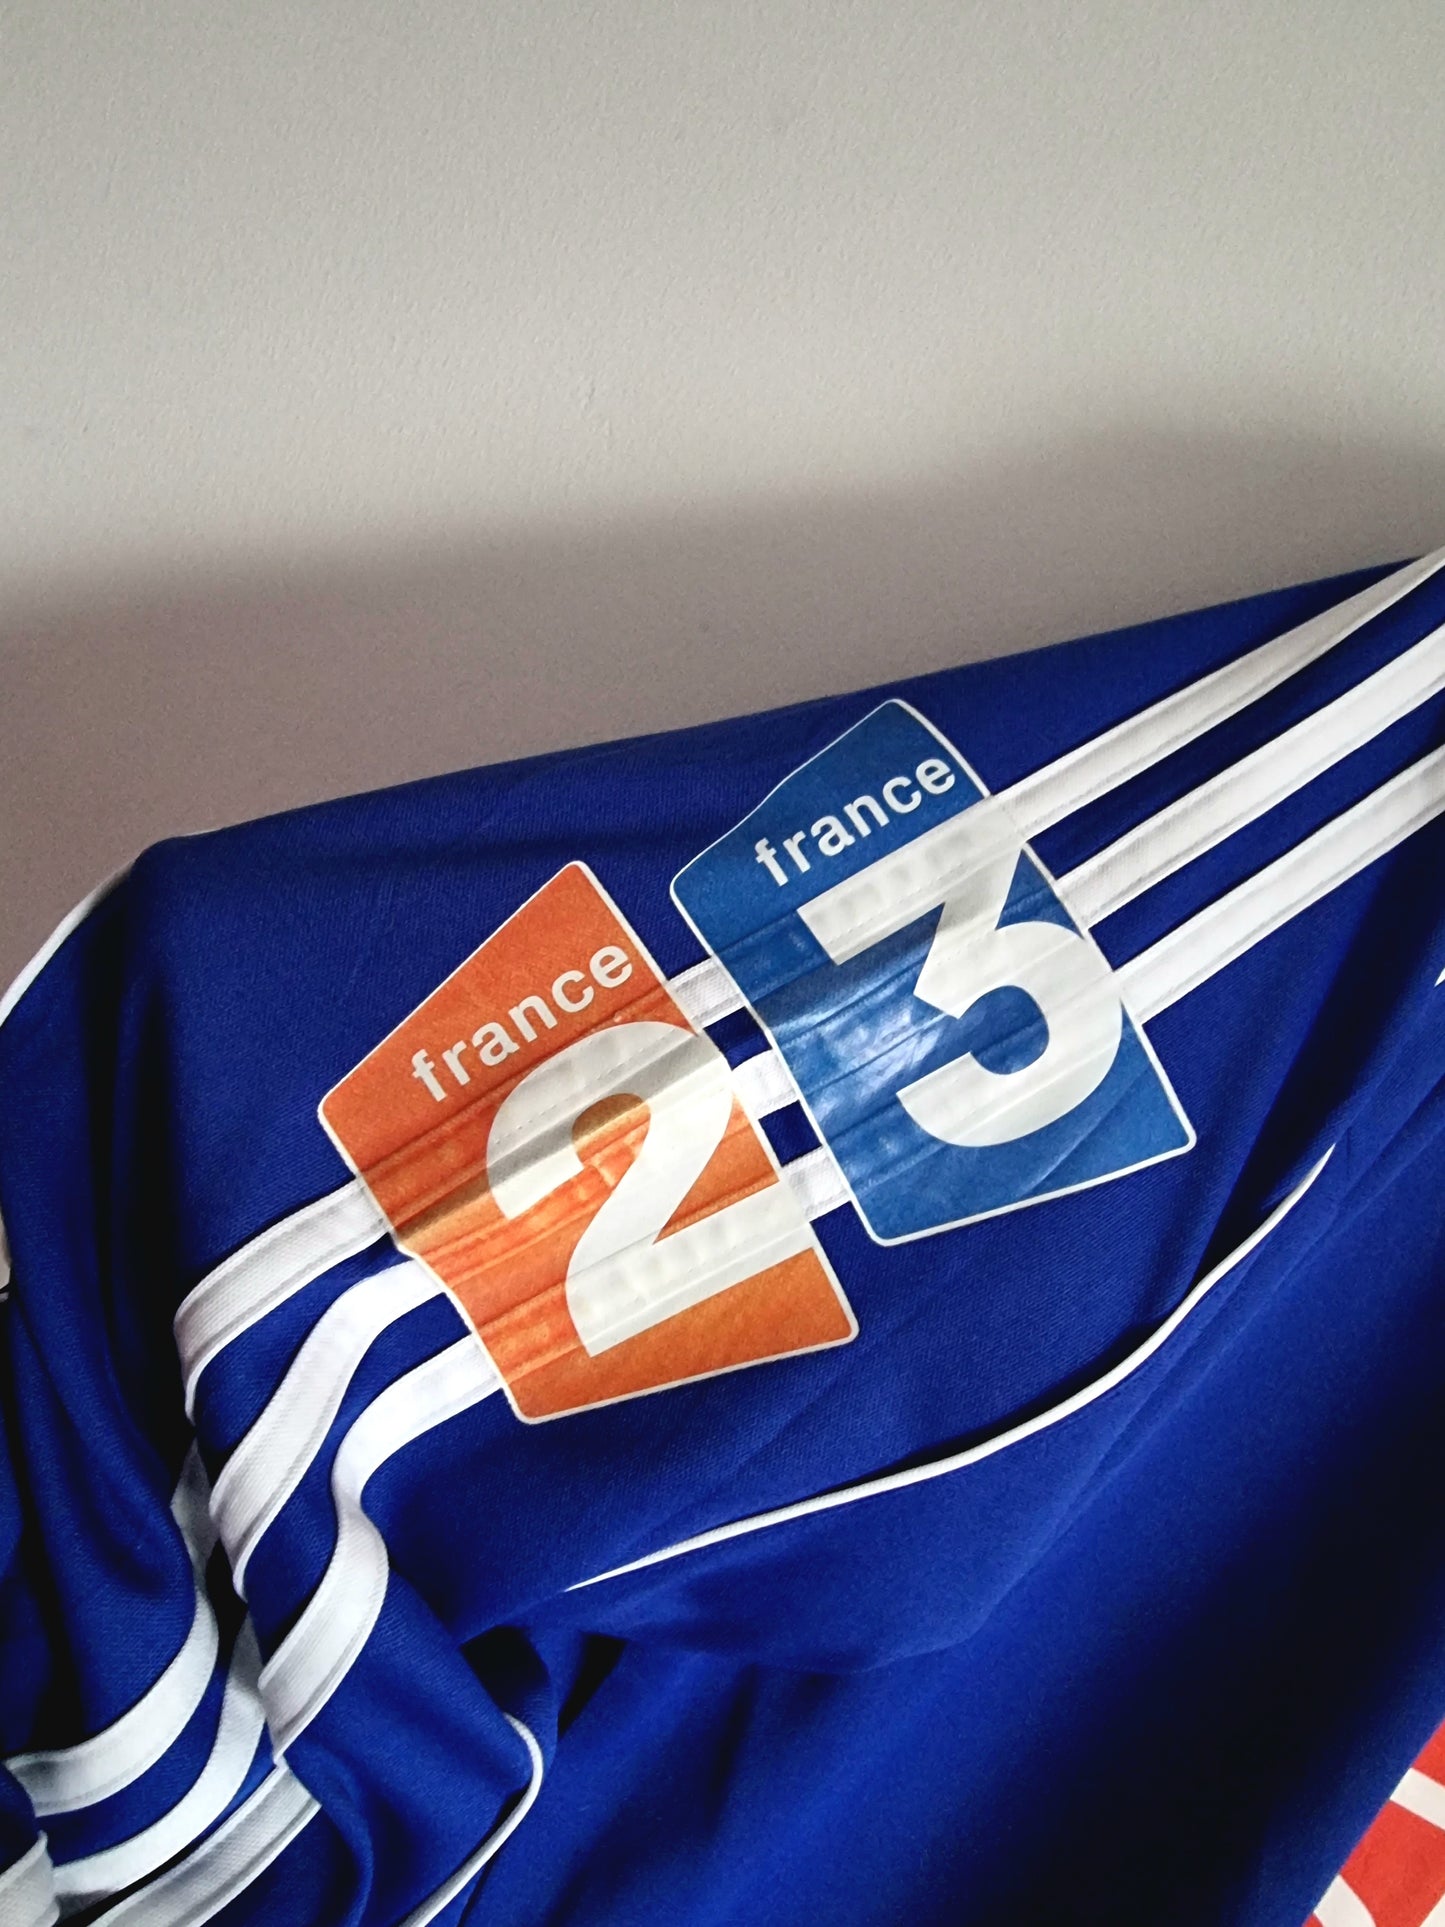 Adidas Coupe De France 07/08 Player Issue Long Sleeve Shirt XL